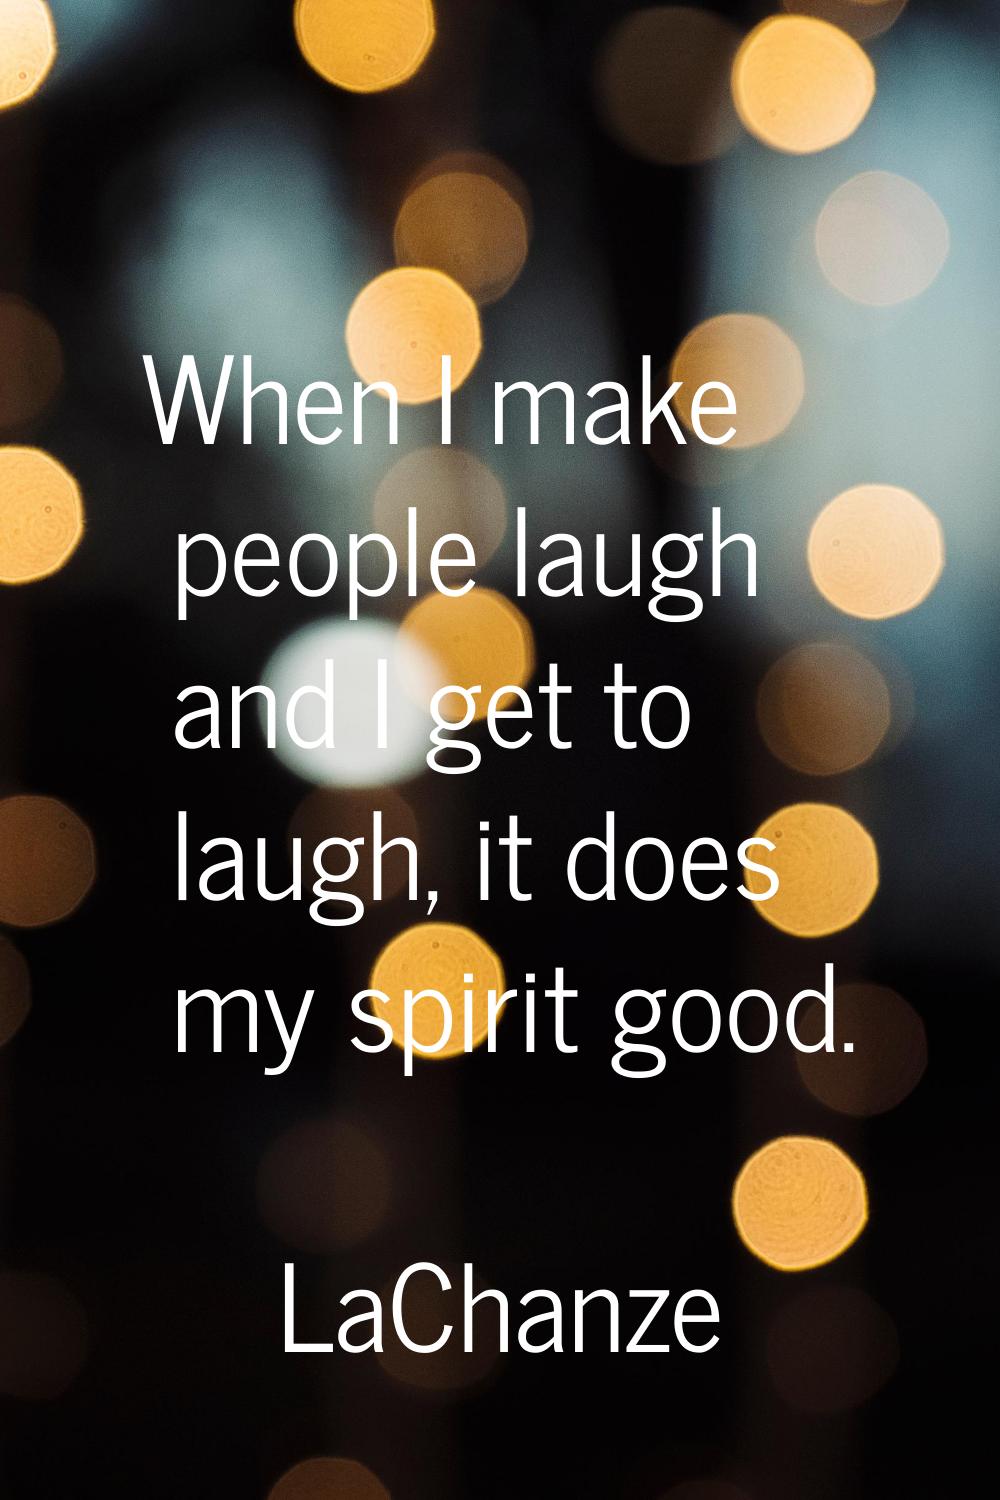 When I make people laugh and I get to laugh, it does my spirit good.